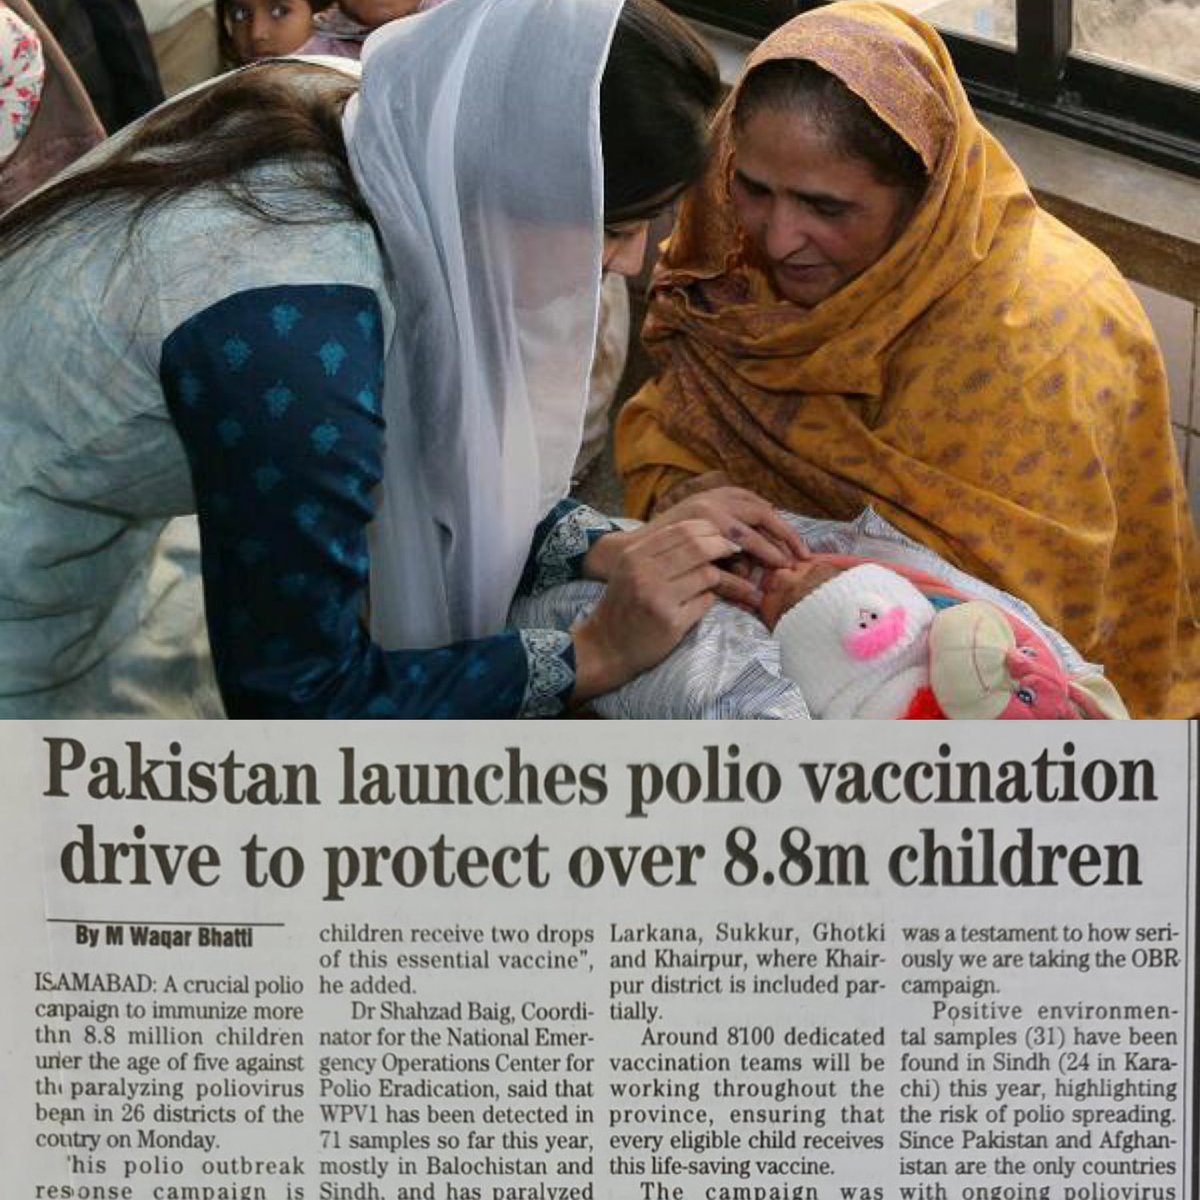 With each drop of polio, we are coming closer to the day when pakistan will be free from polio. 
#PolioFreePakistan